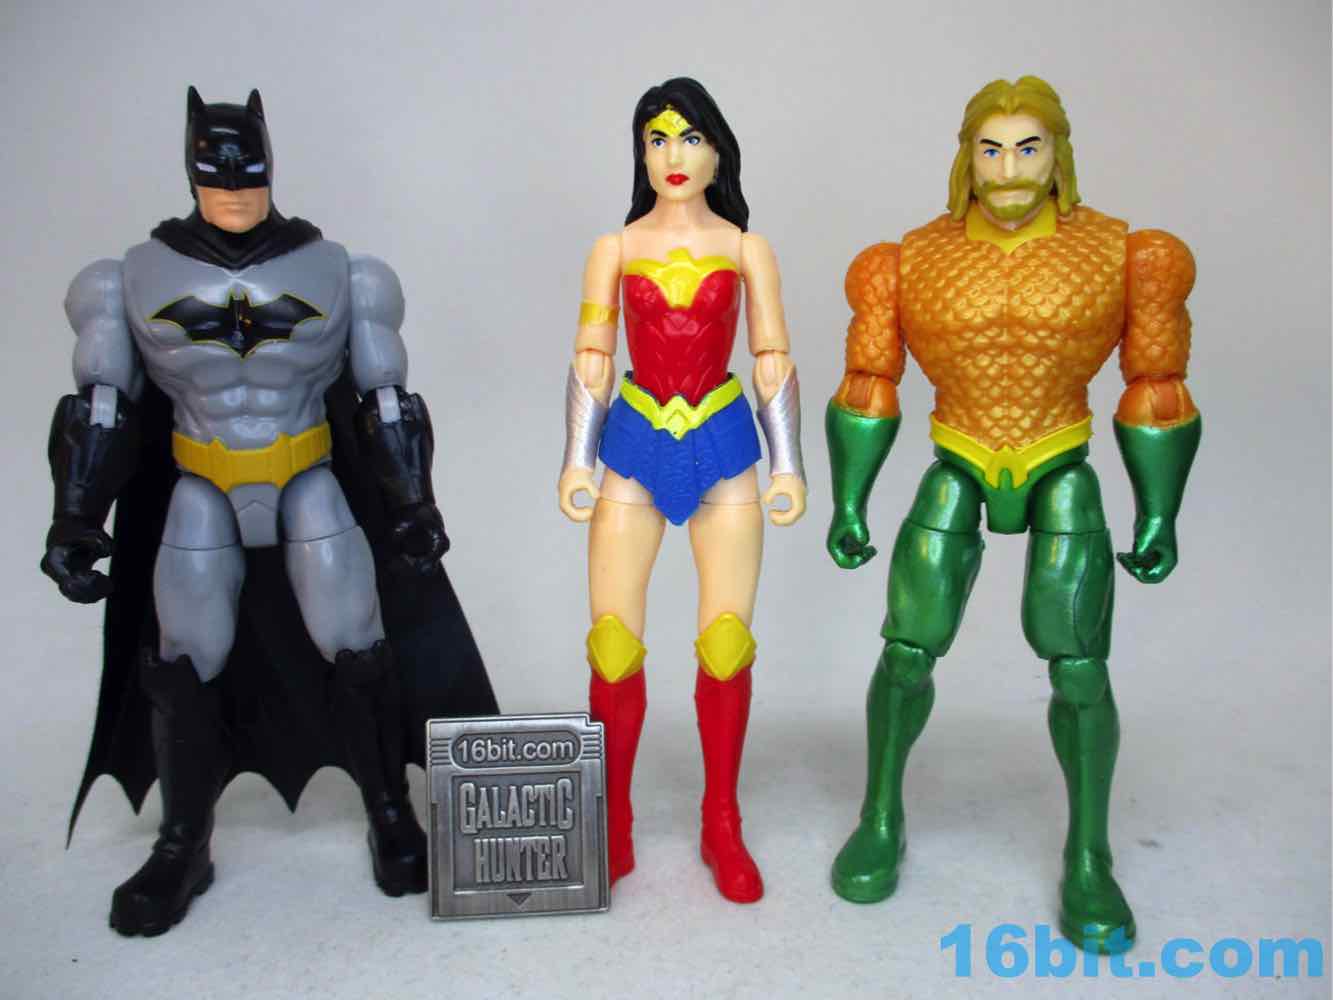 Spin Master unveils additional 4-inch DC figures